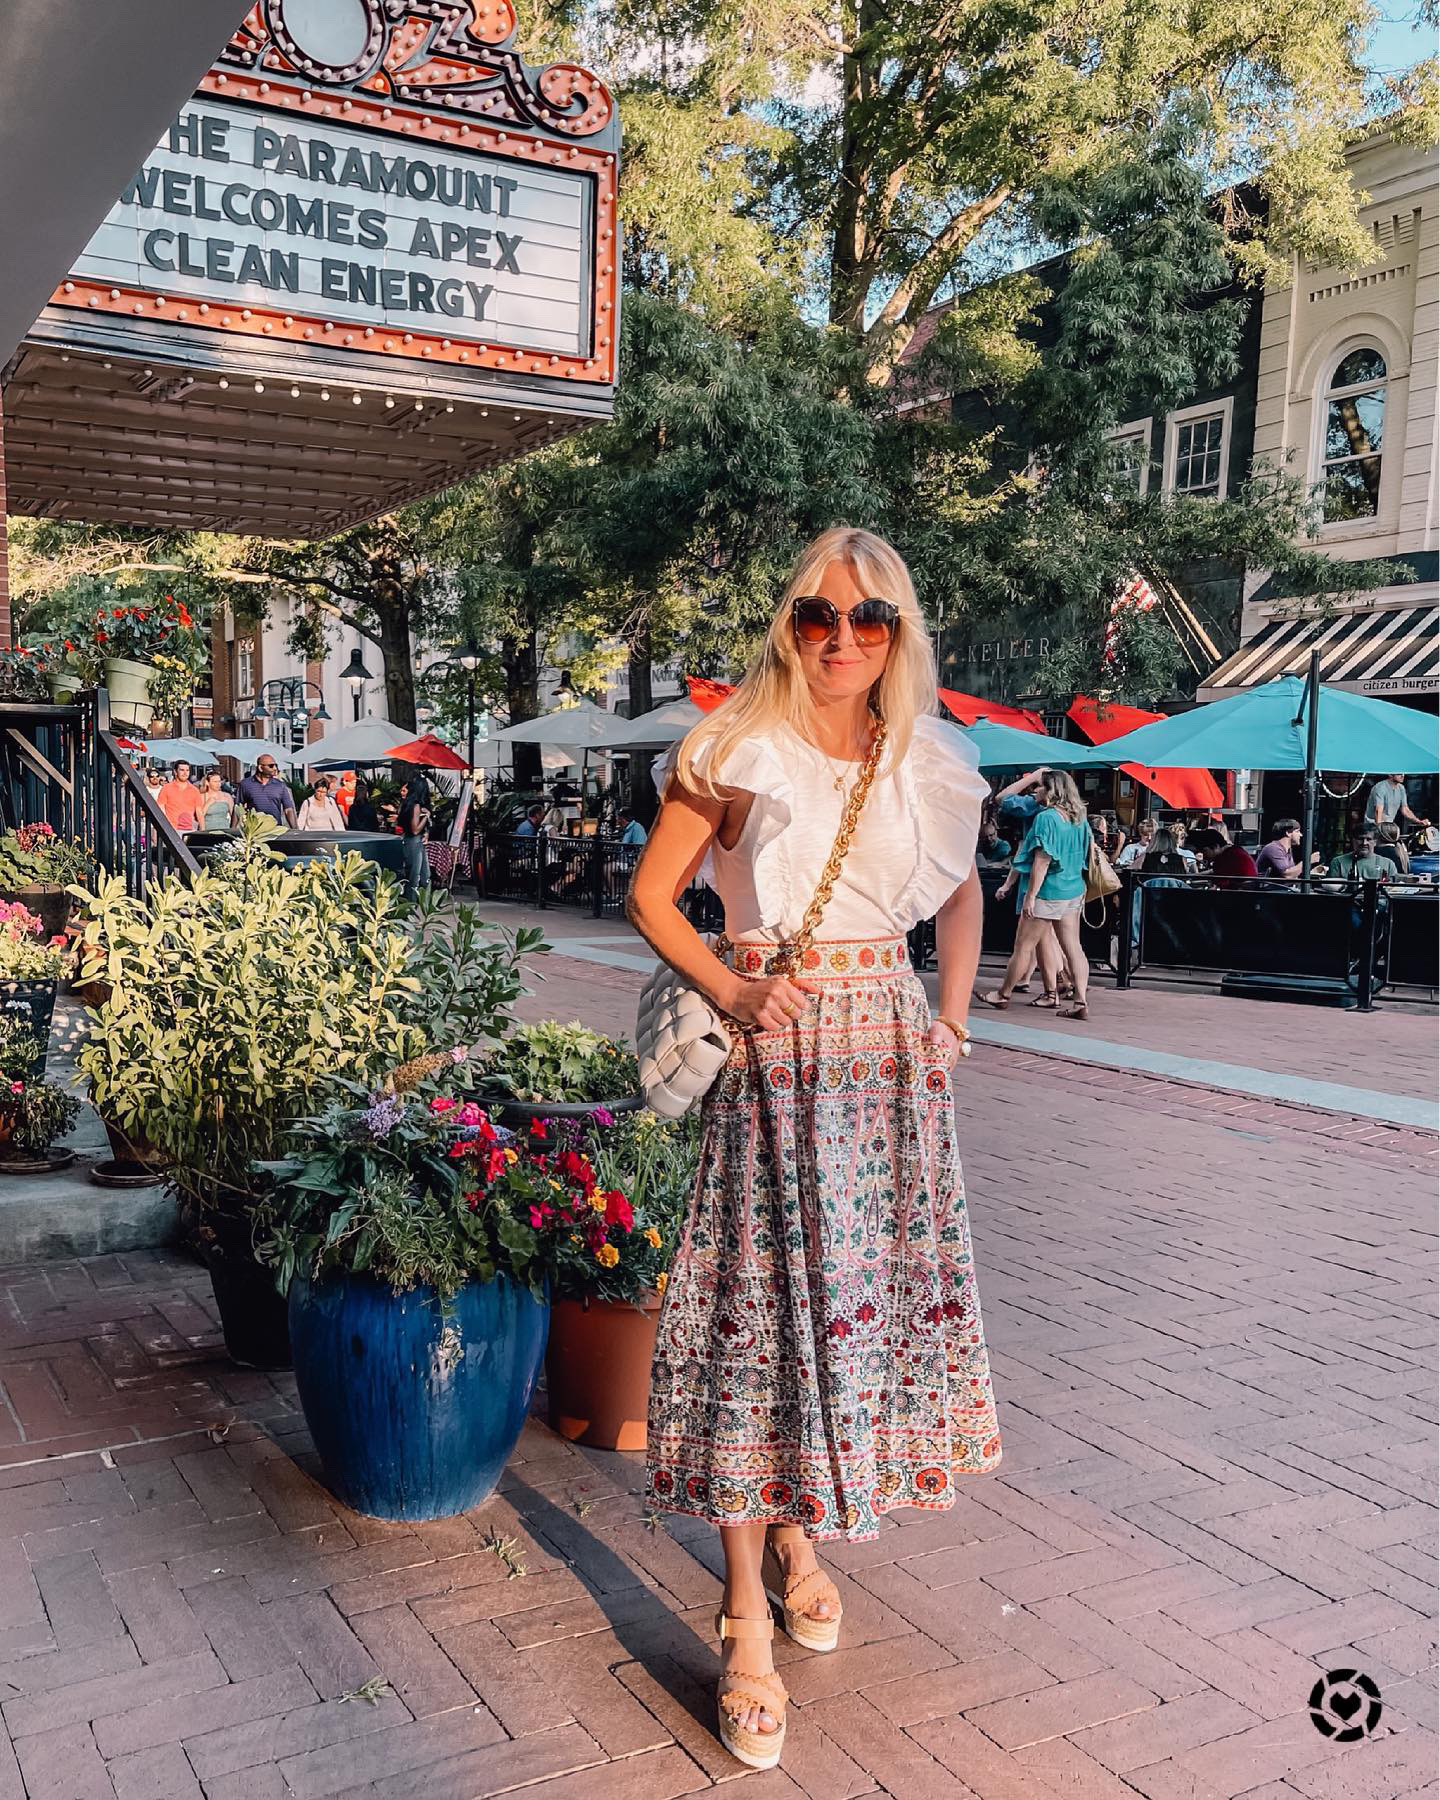 where to stop on a cross-country road trip, best places to stop on a cross country road trip, cross country road trip, west coast to east coast road trip, erin busbee, traveling with kids, how to travel with kids, how to travel with a dog, cross country road trip with kids, charlottesville virginia, alice + olivia embroidered midi skirt, see by chloe wedges, nation ltd ruffle sleeve top, bottega veneta chain cassette bag, salvatore ferragamo sunglasses